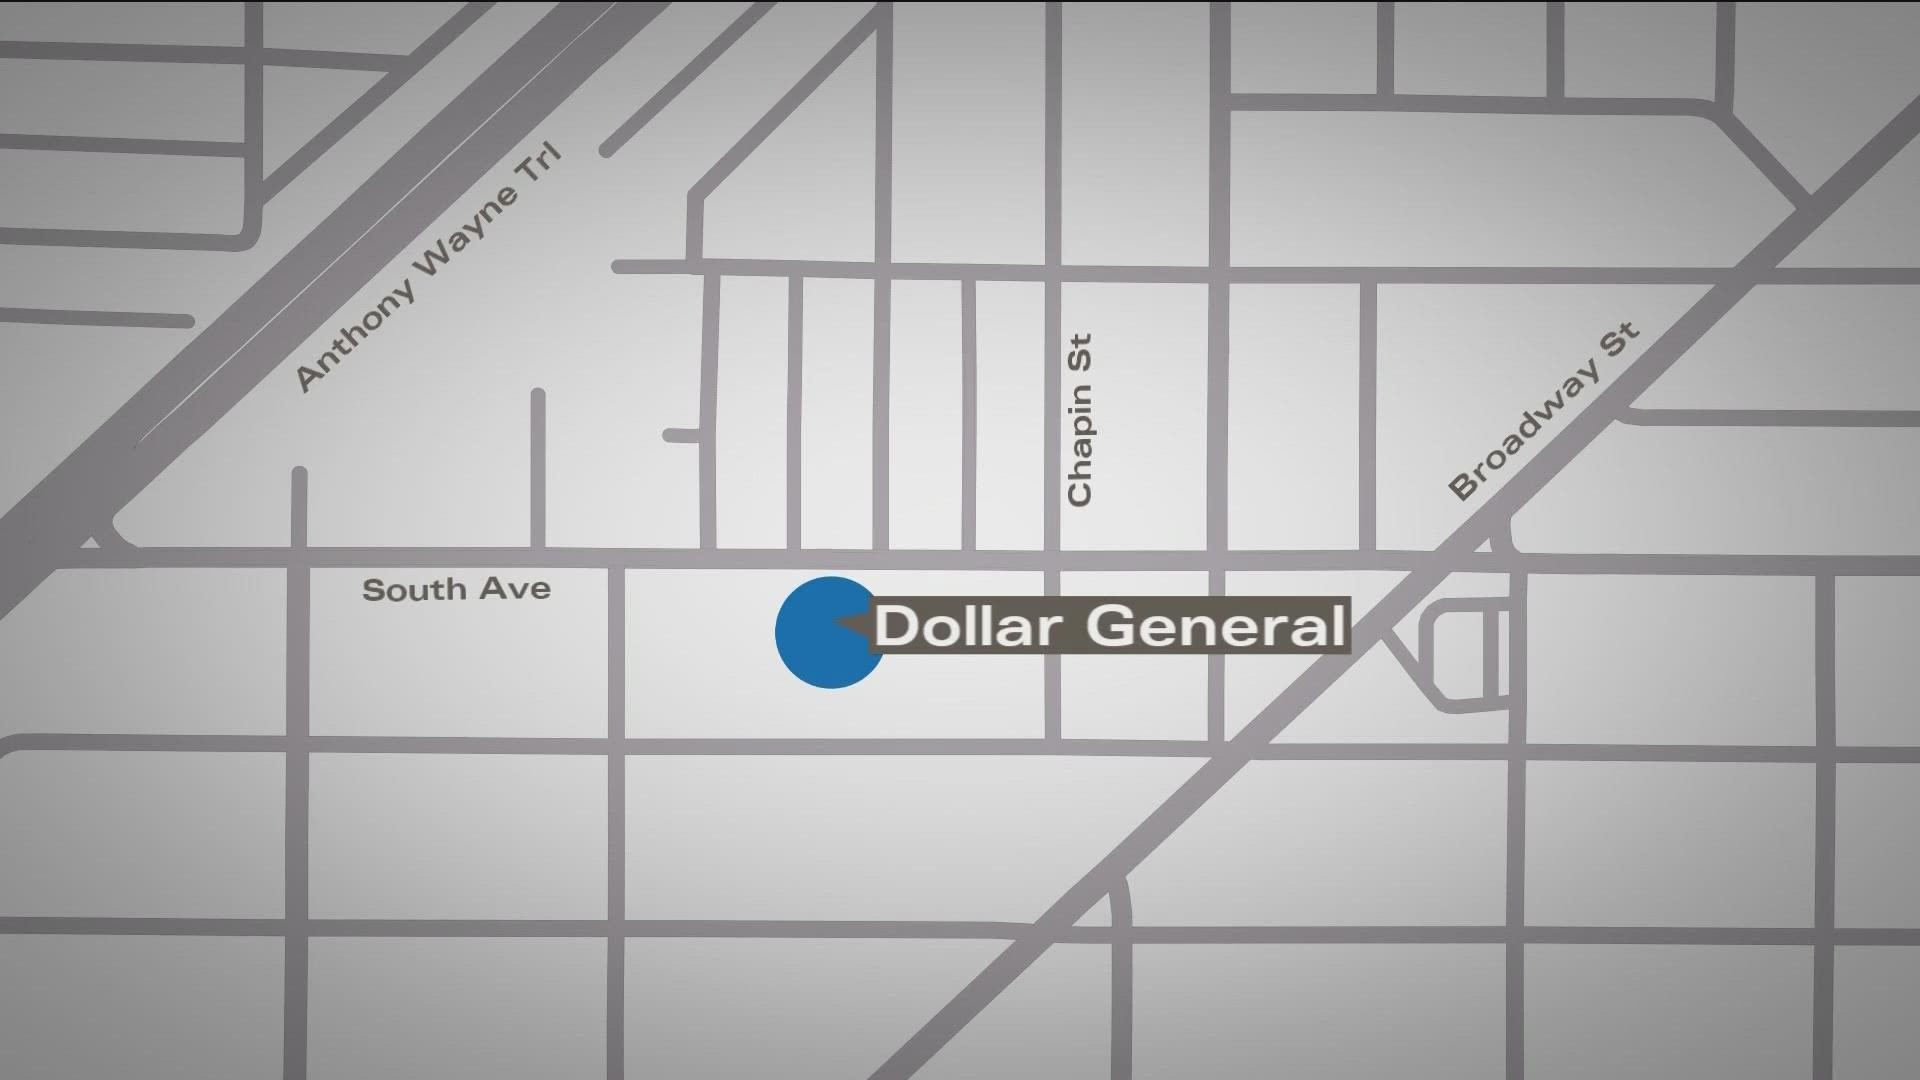 Employees at Dollar General told Toledo police that a man entered the store, pointed a handgun at them and demanded money. The suspect fled with cash.